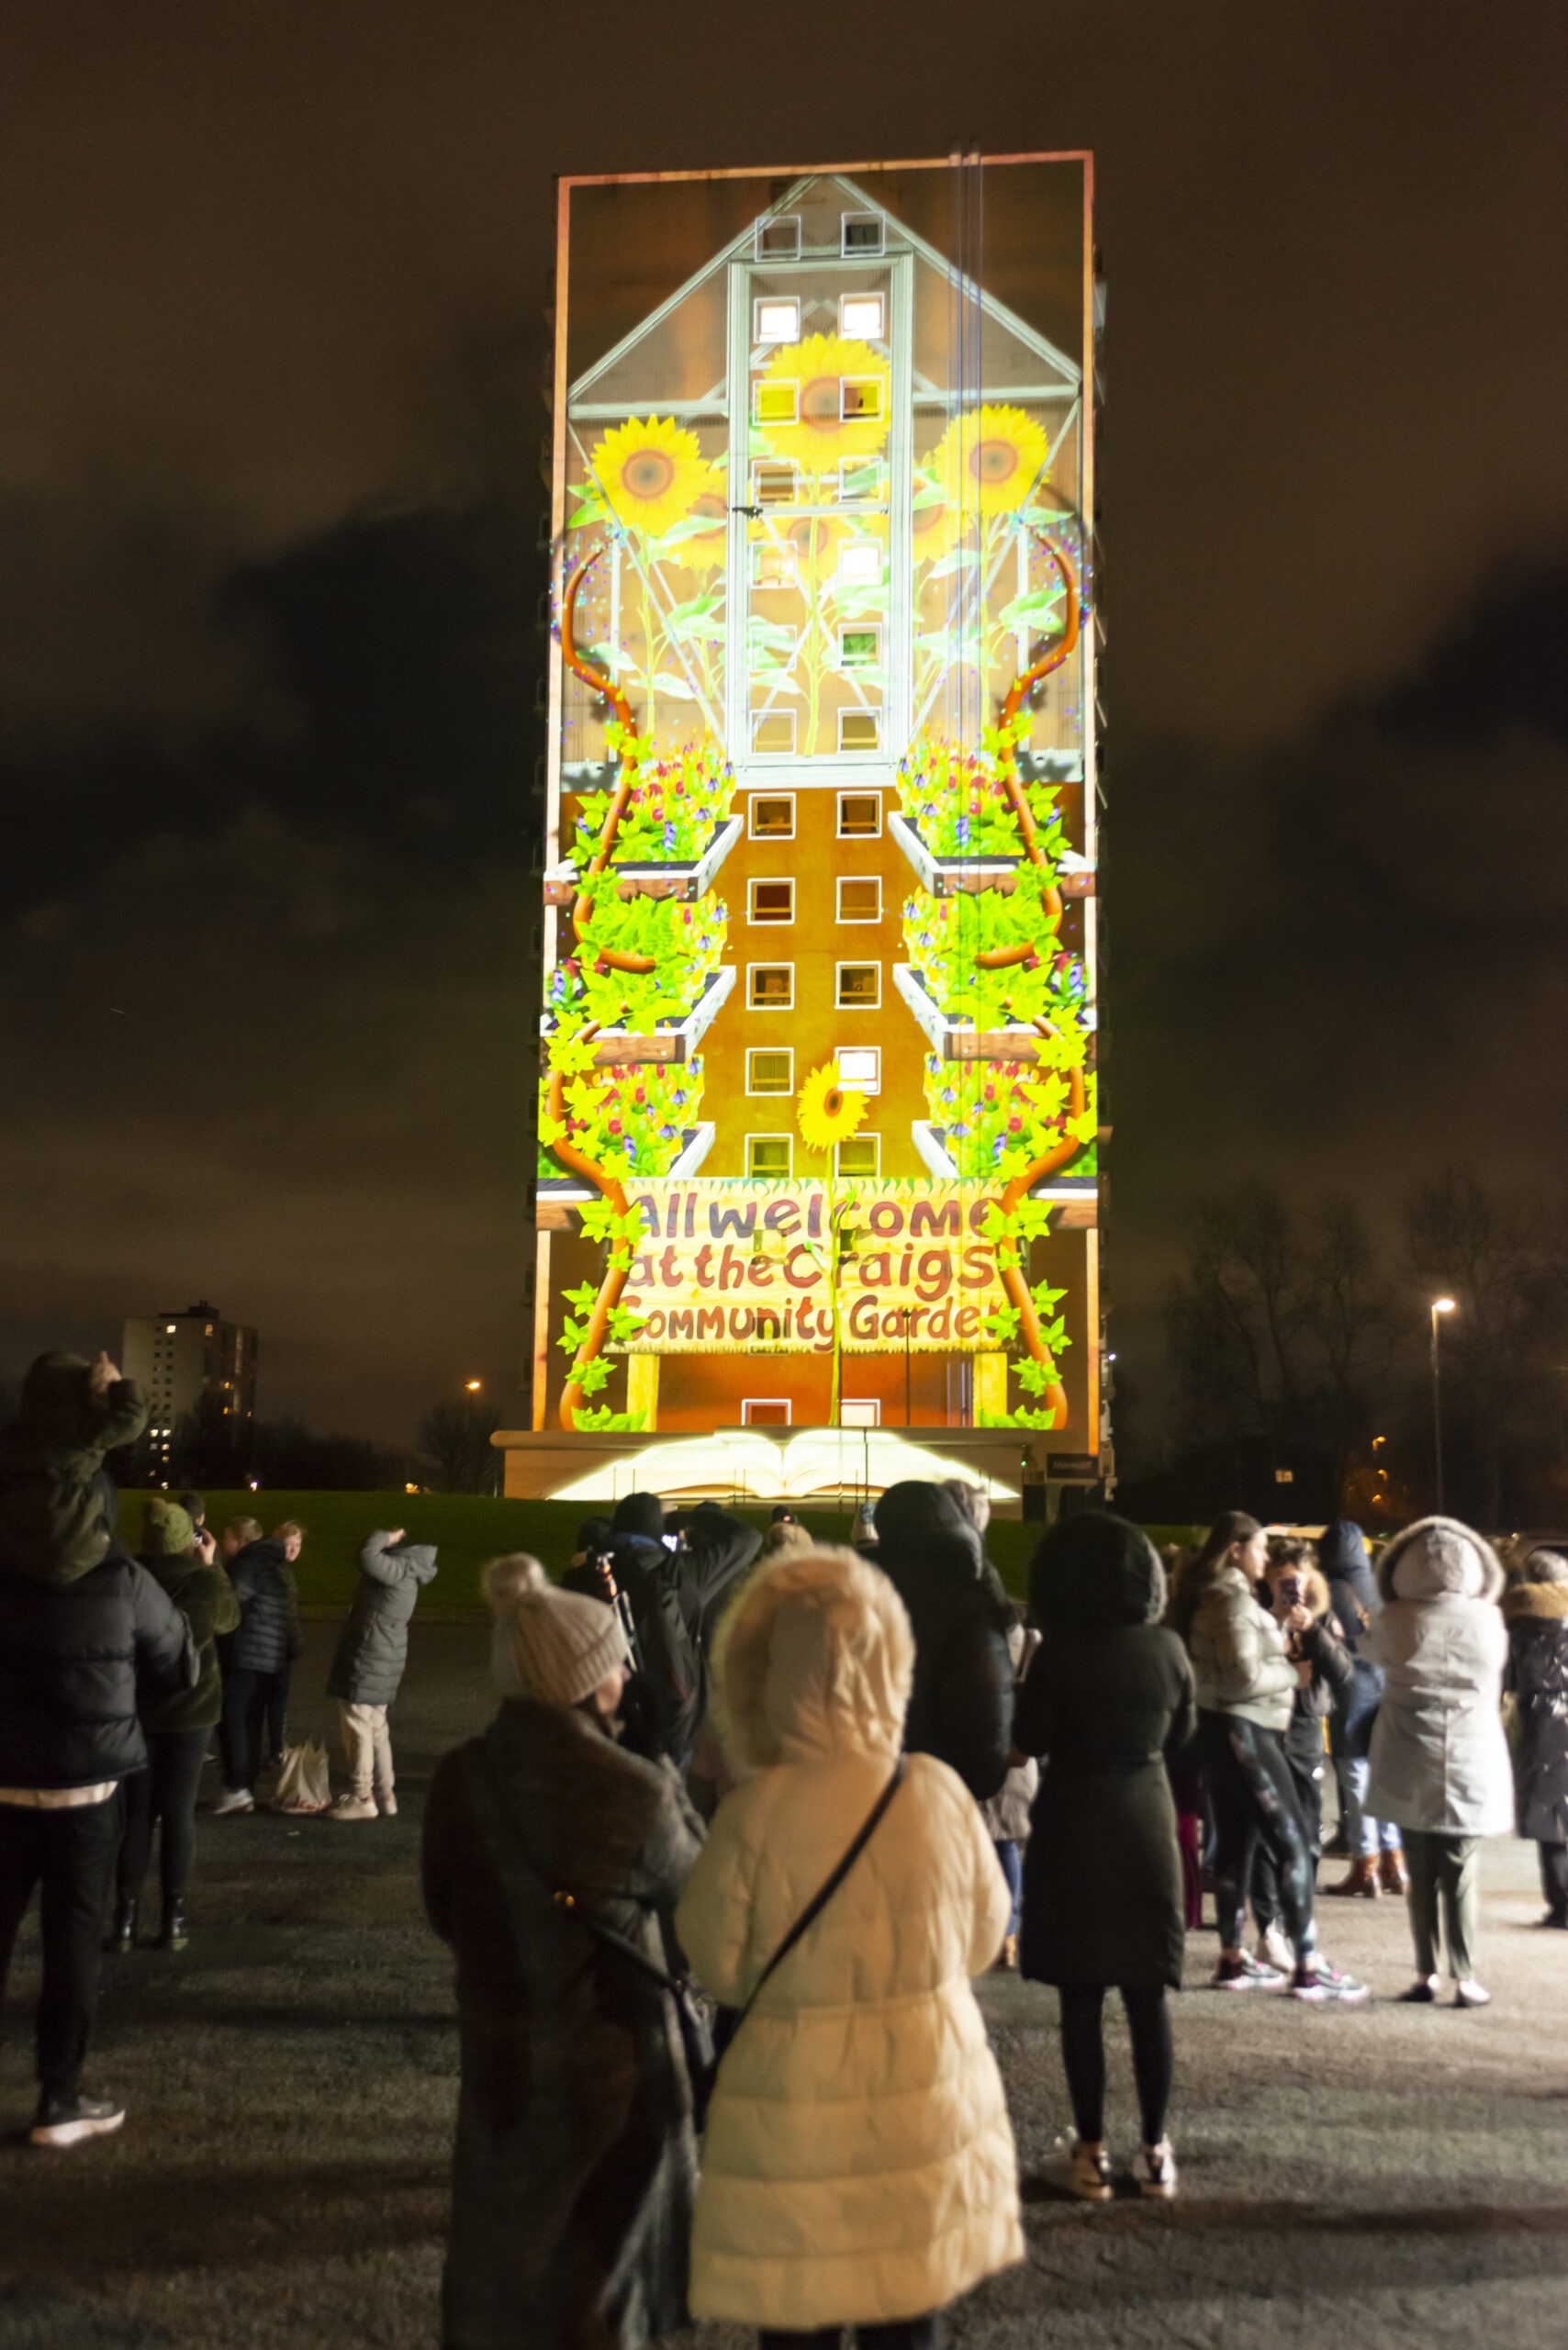 Stockbridge Village tenants see their memories, hopes and dreams come alive in atmospheric tower-block light show